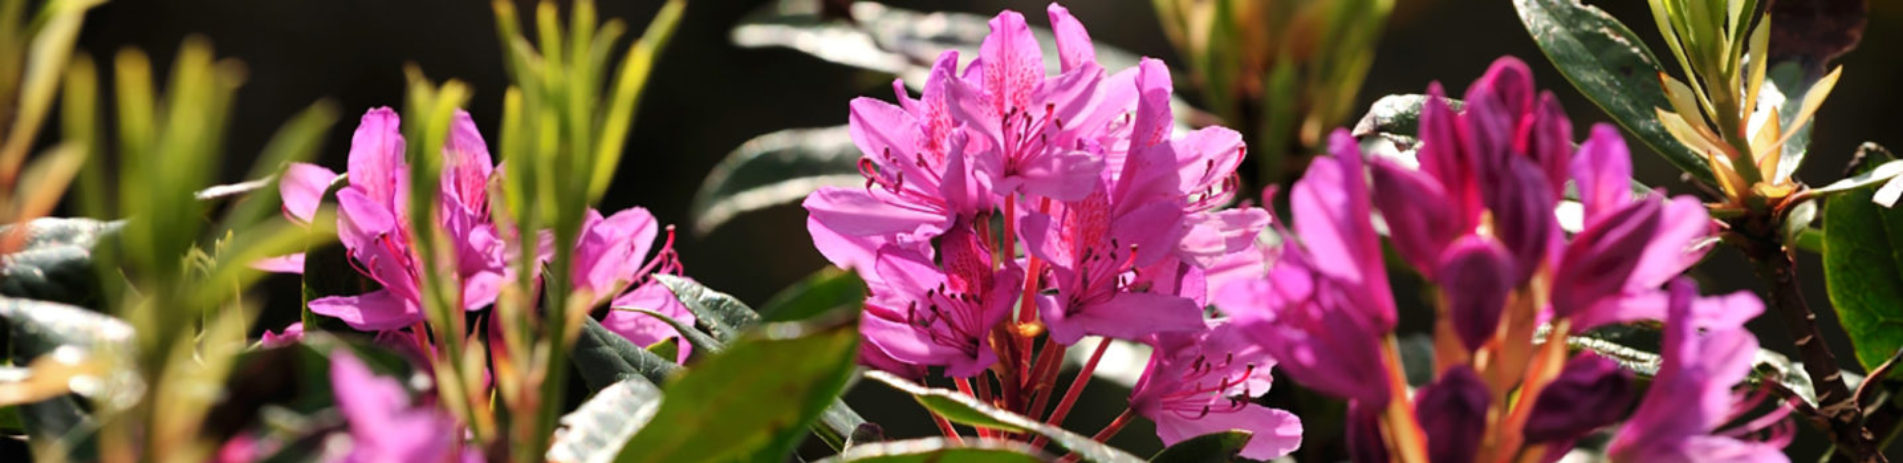 pink-rhododendron-flowers-and-leaves